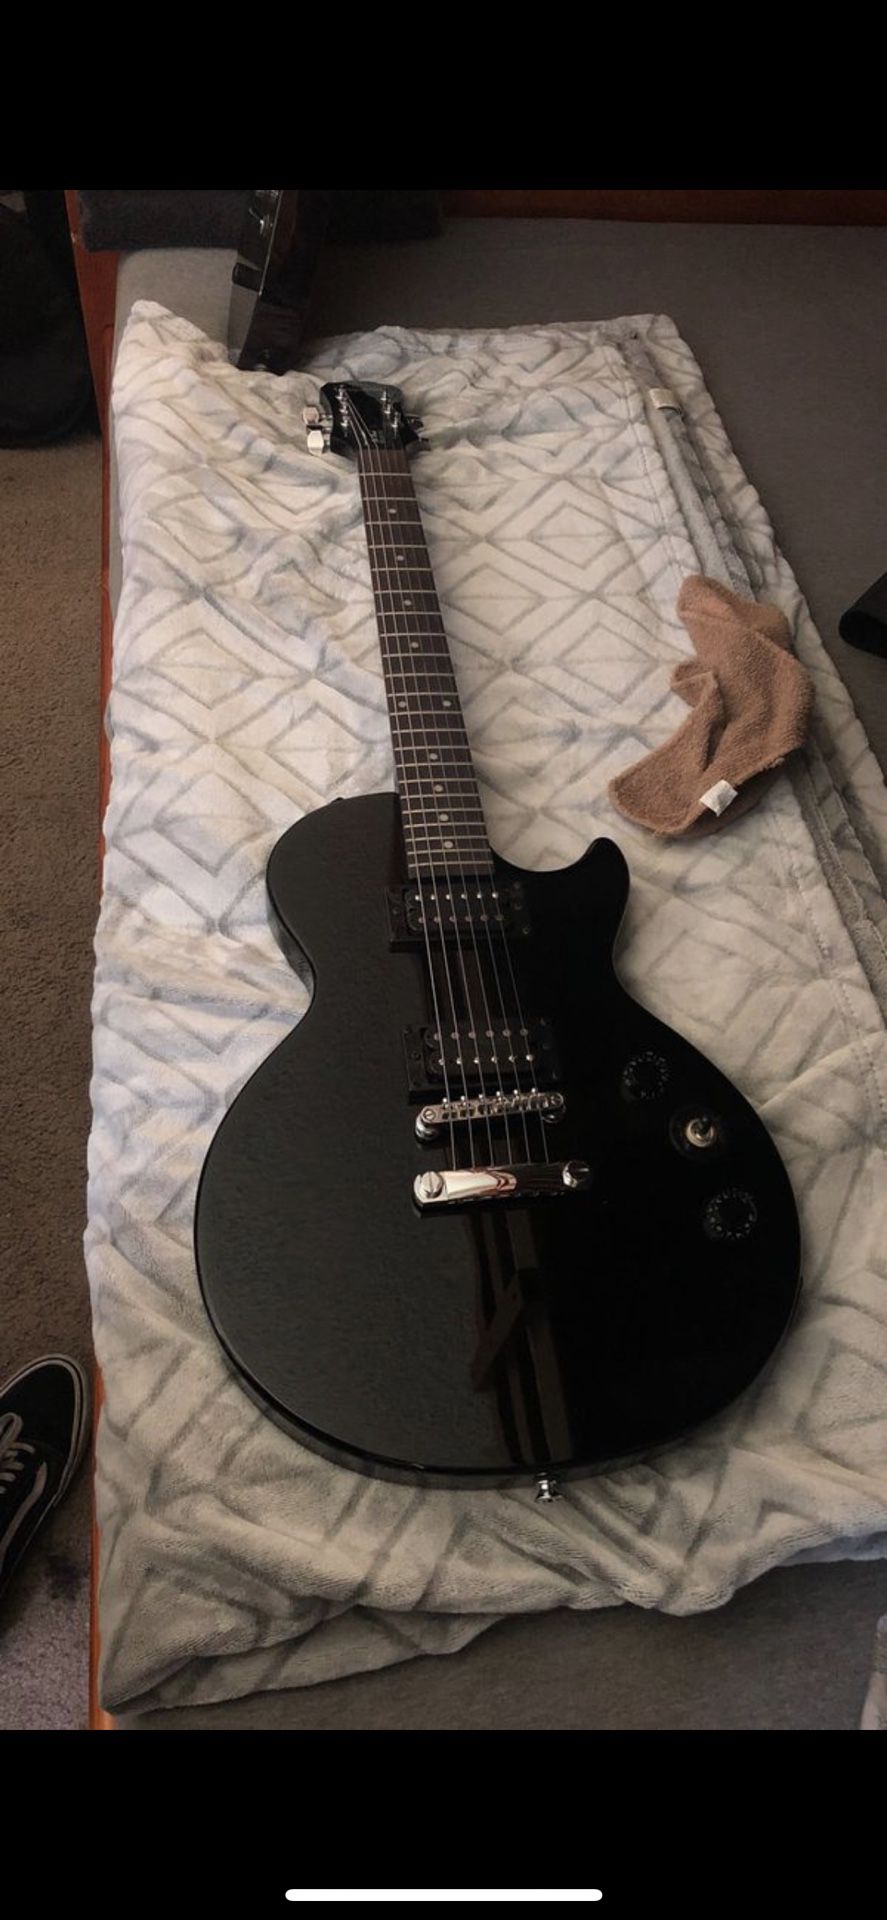 Epiphone electric guitar & Carry case